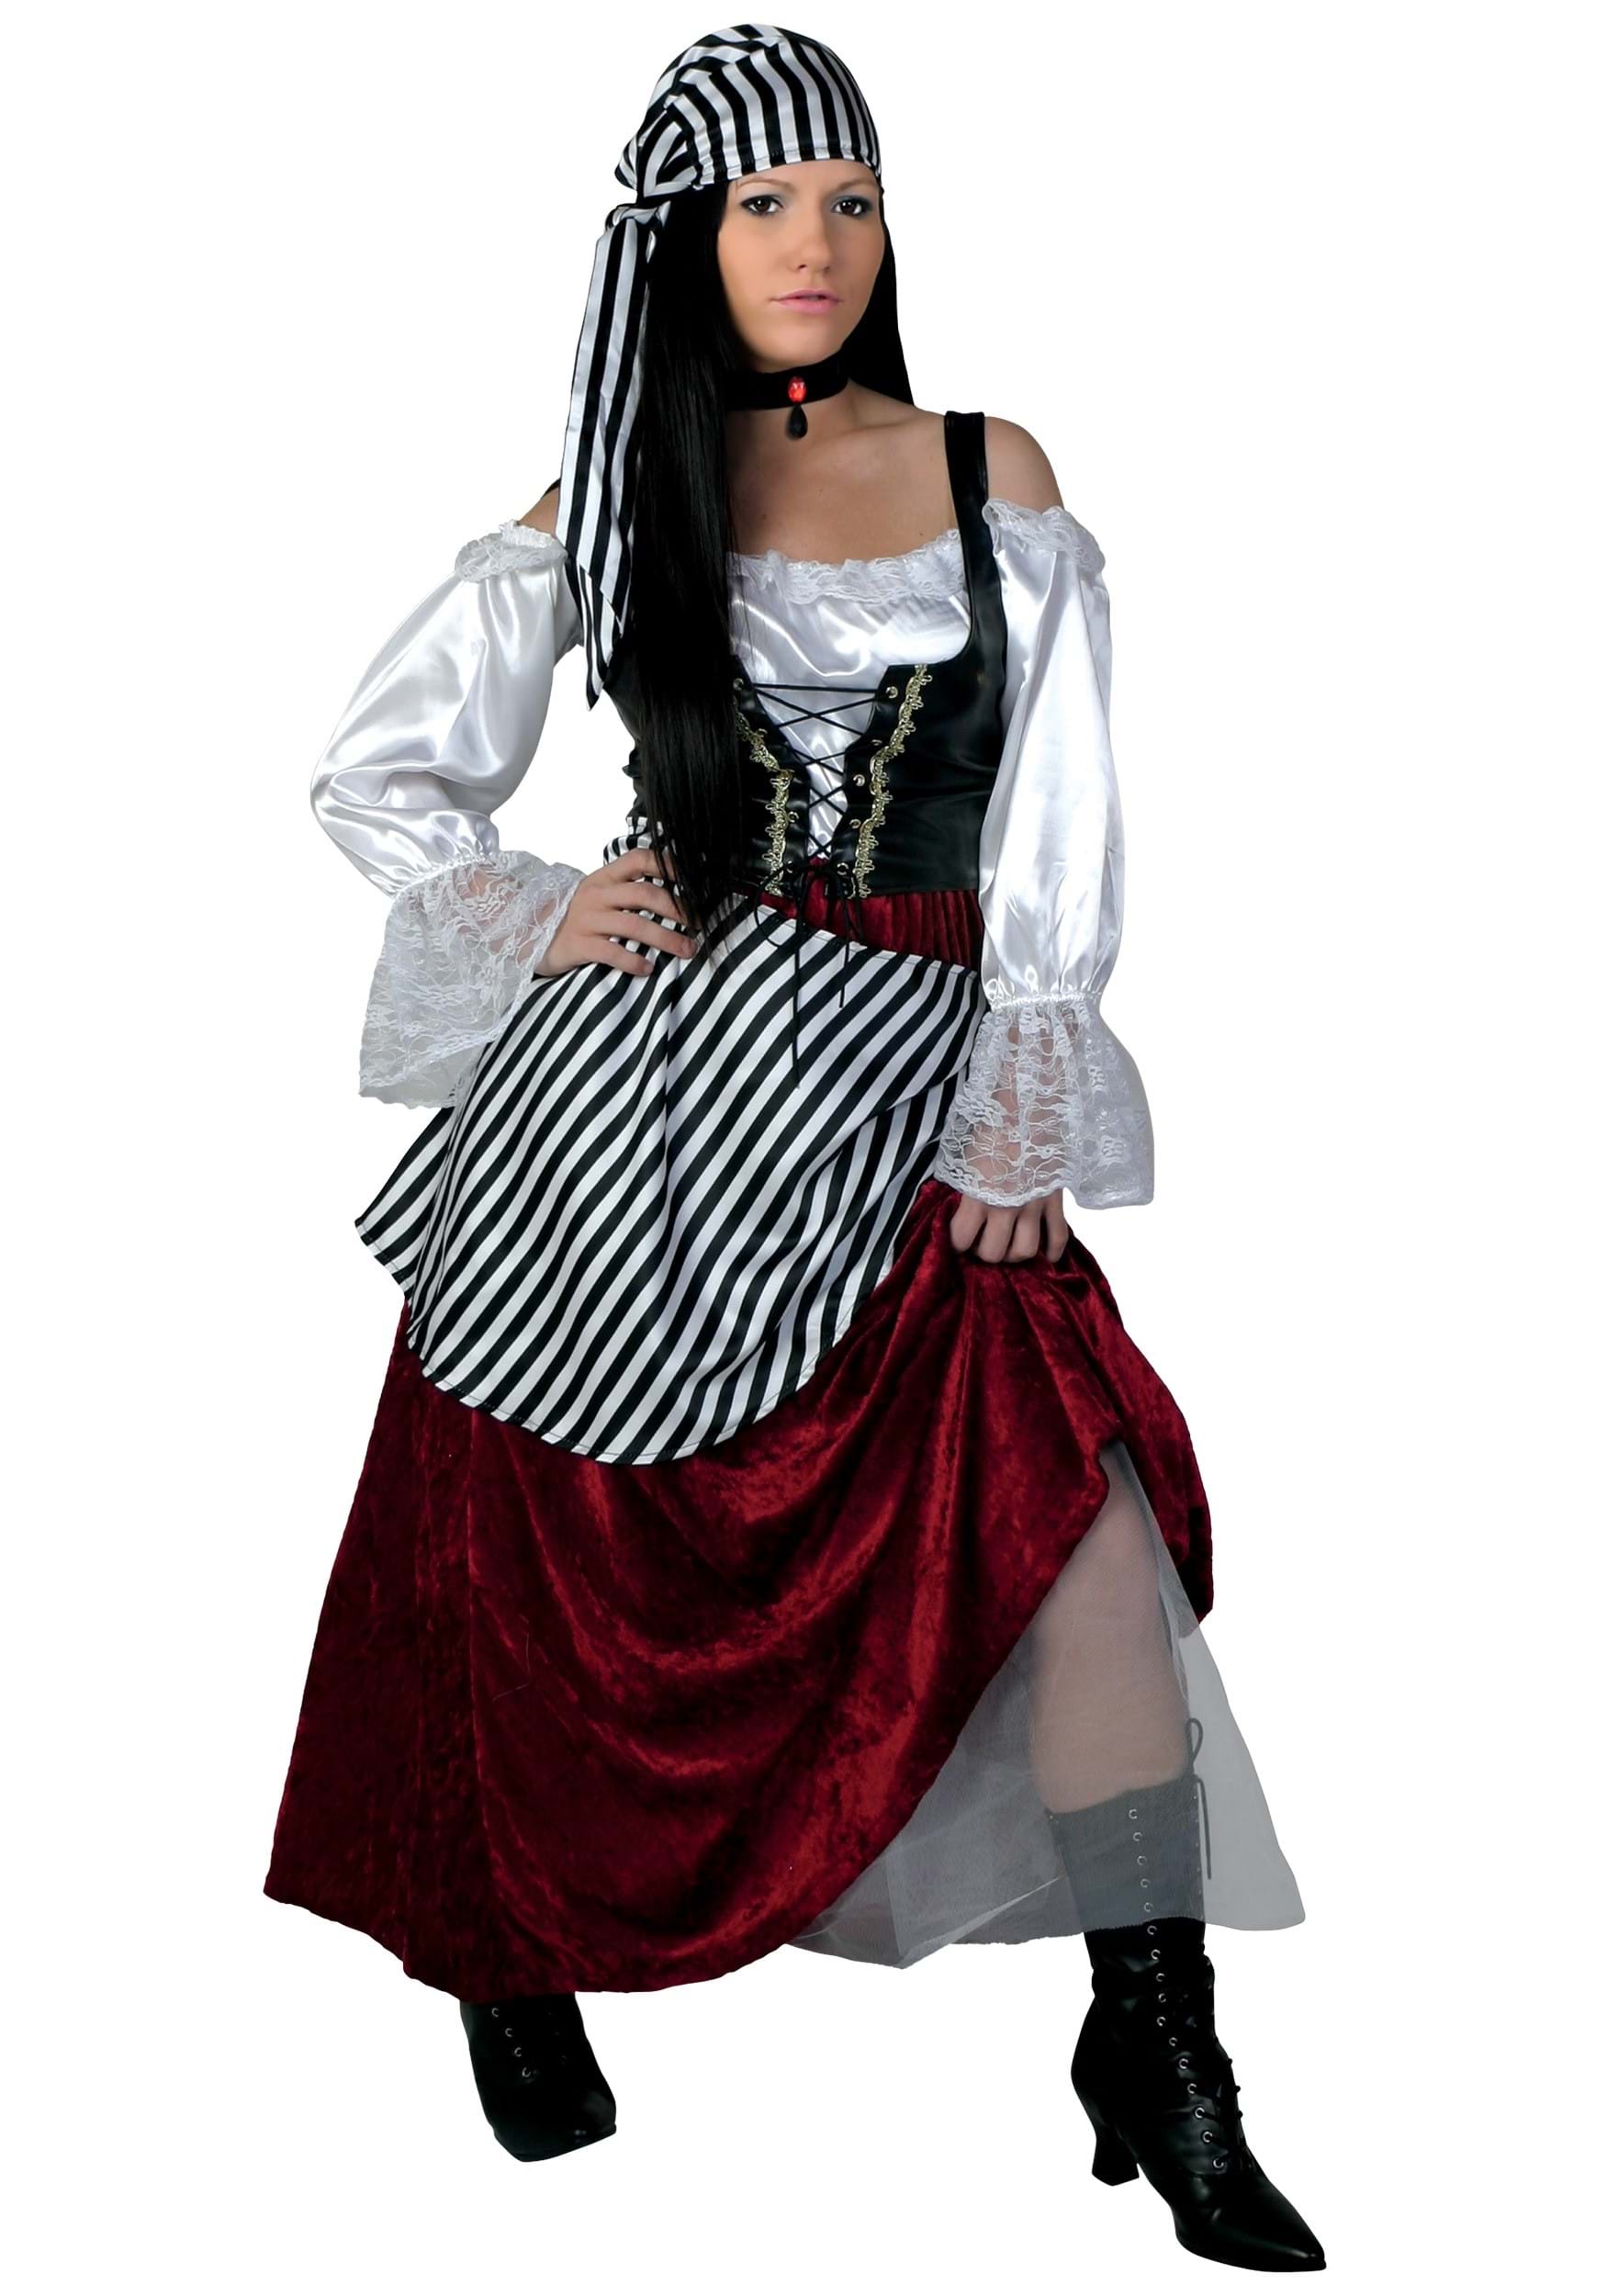 https://images.halloweencostumes.ca/products/5072/2-1-301621/womens-feisty-pirate-wench-costume-alt-1.jpeg